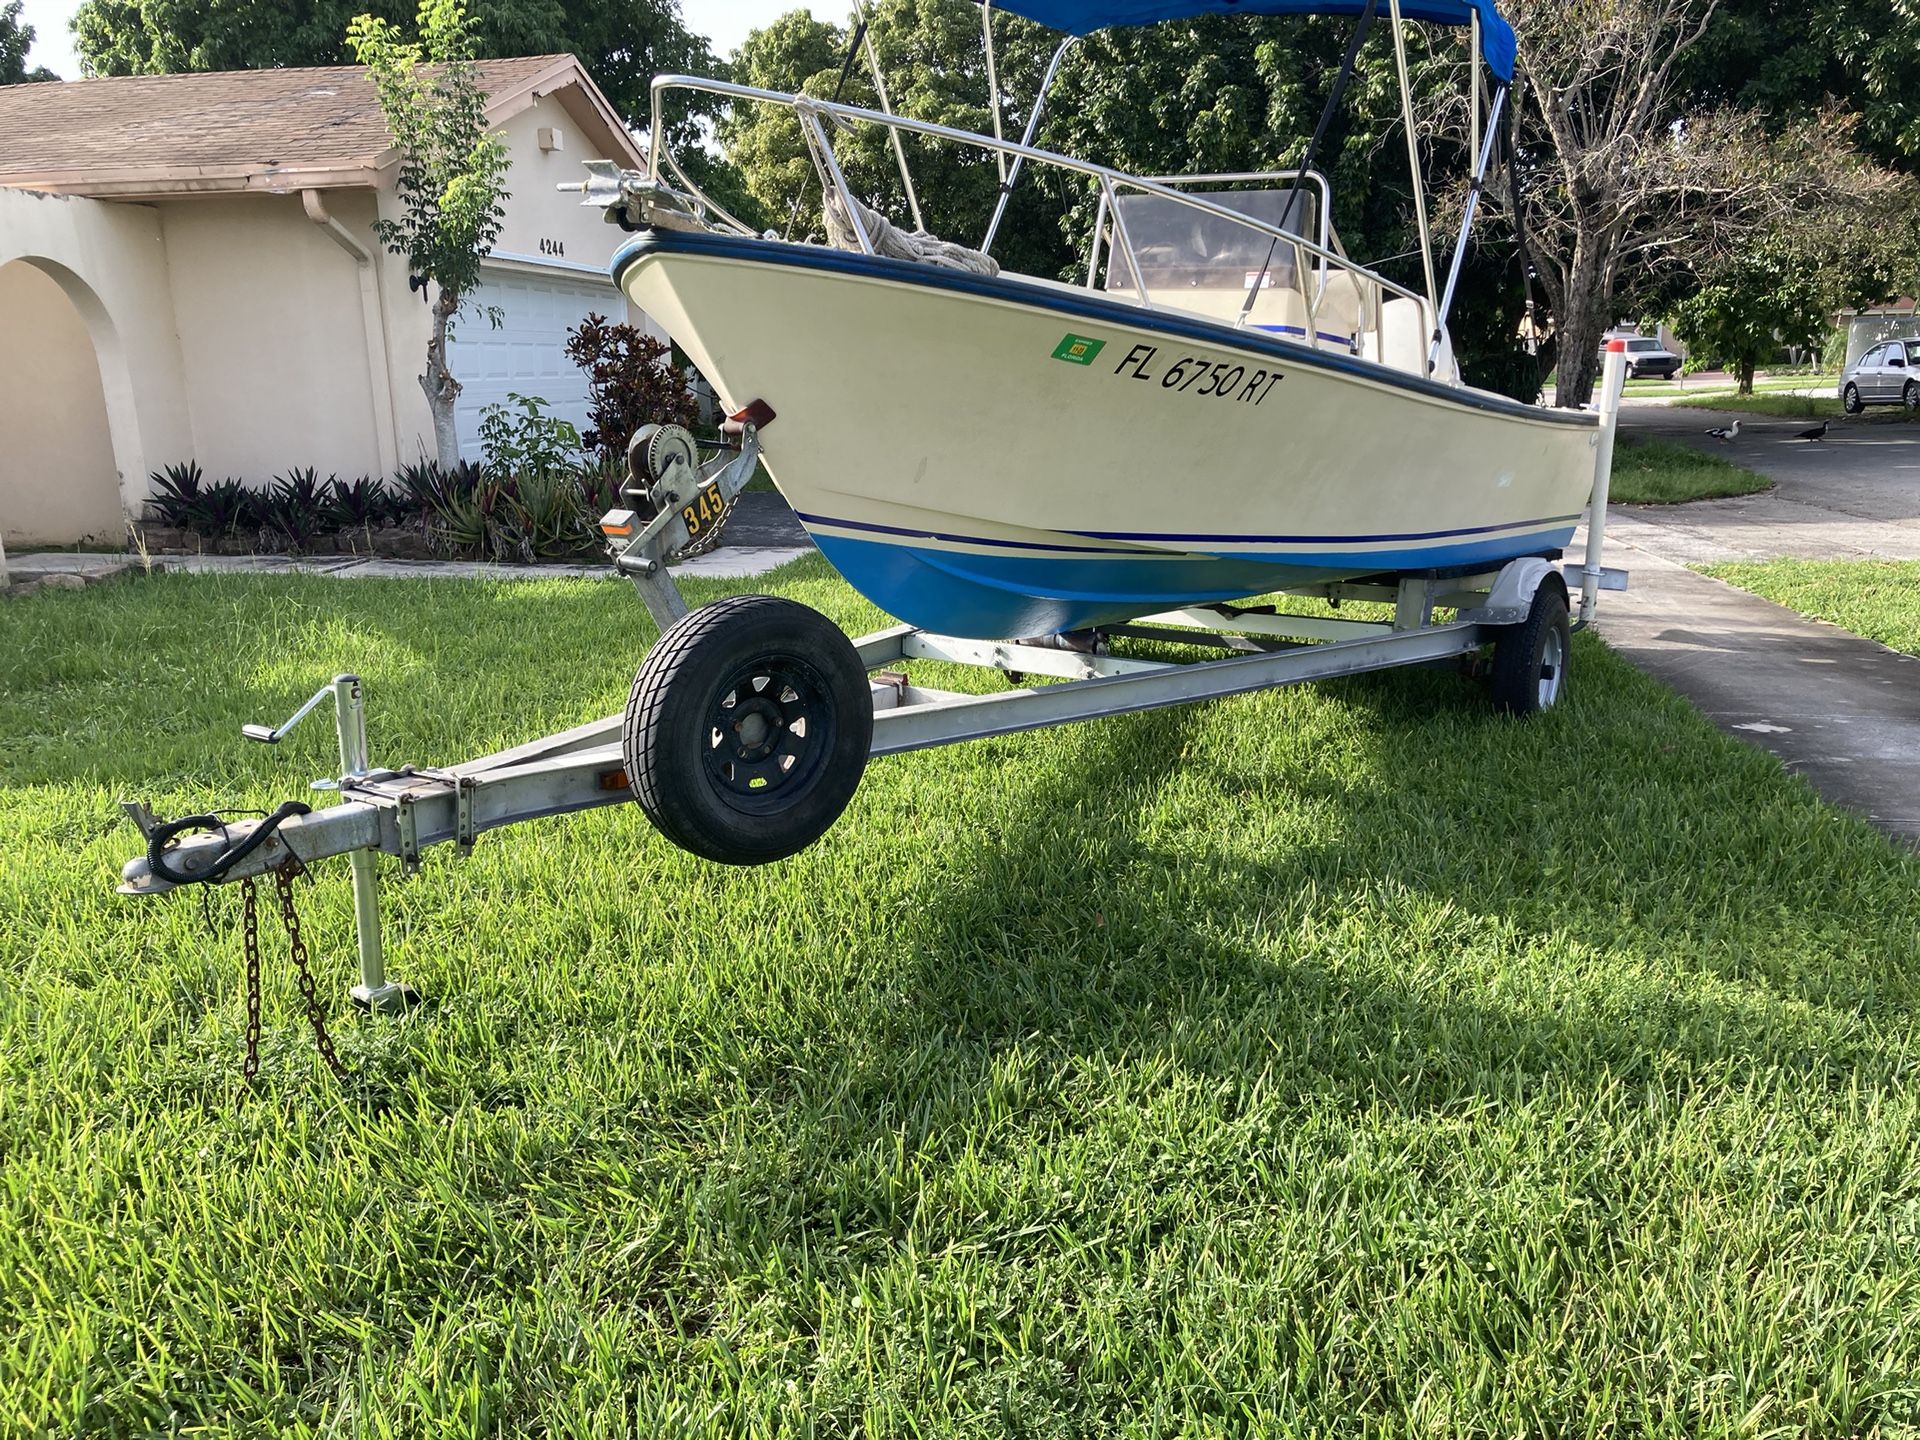 Aqua Sport 17’ With Johnson 90HP,27 Gallons Gas Tank,Aluminum Trailer With New Lights,Bimini Top, Ready To Fish Kendall West Area 